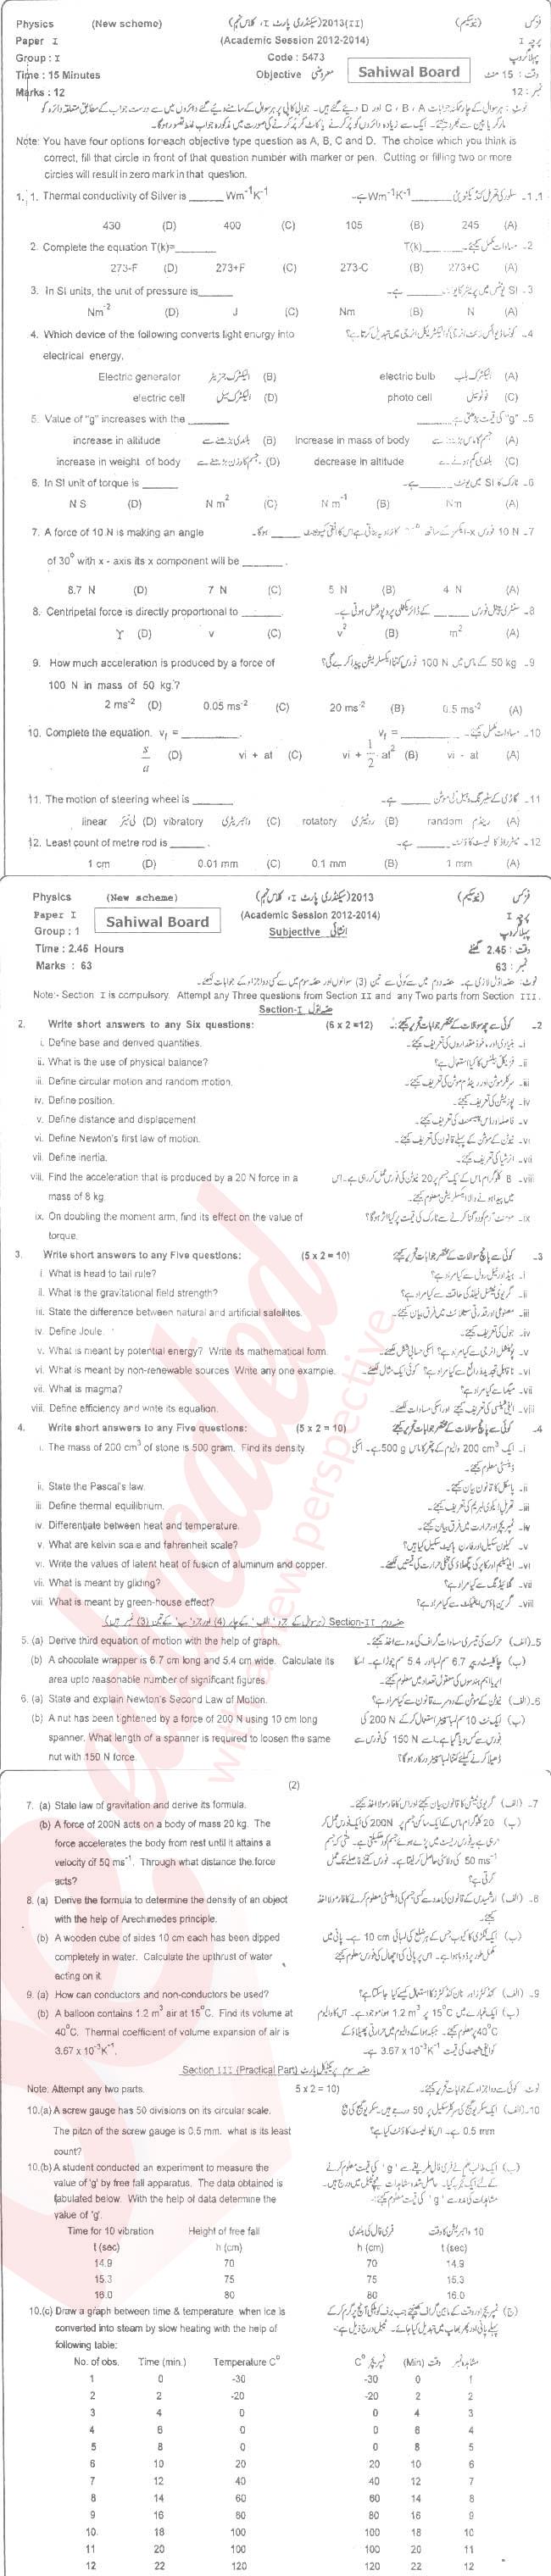 Physics 9th class Past Paper Group 1 BISE Sahiwal 2013